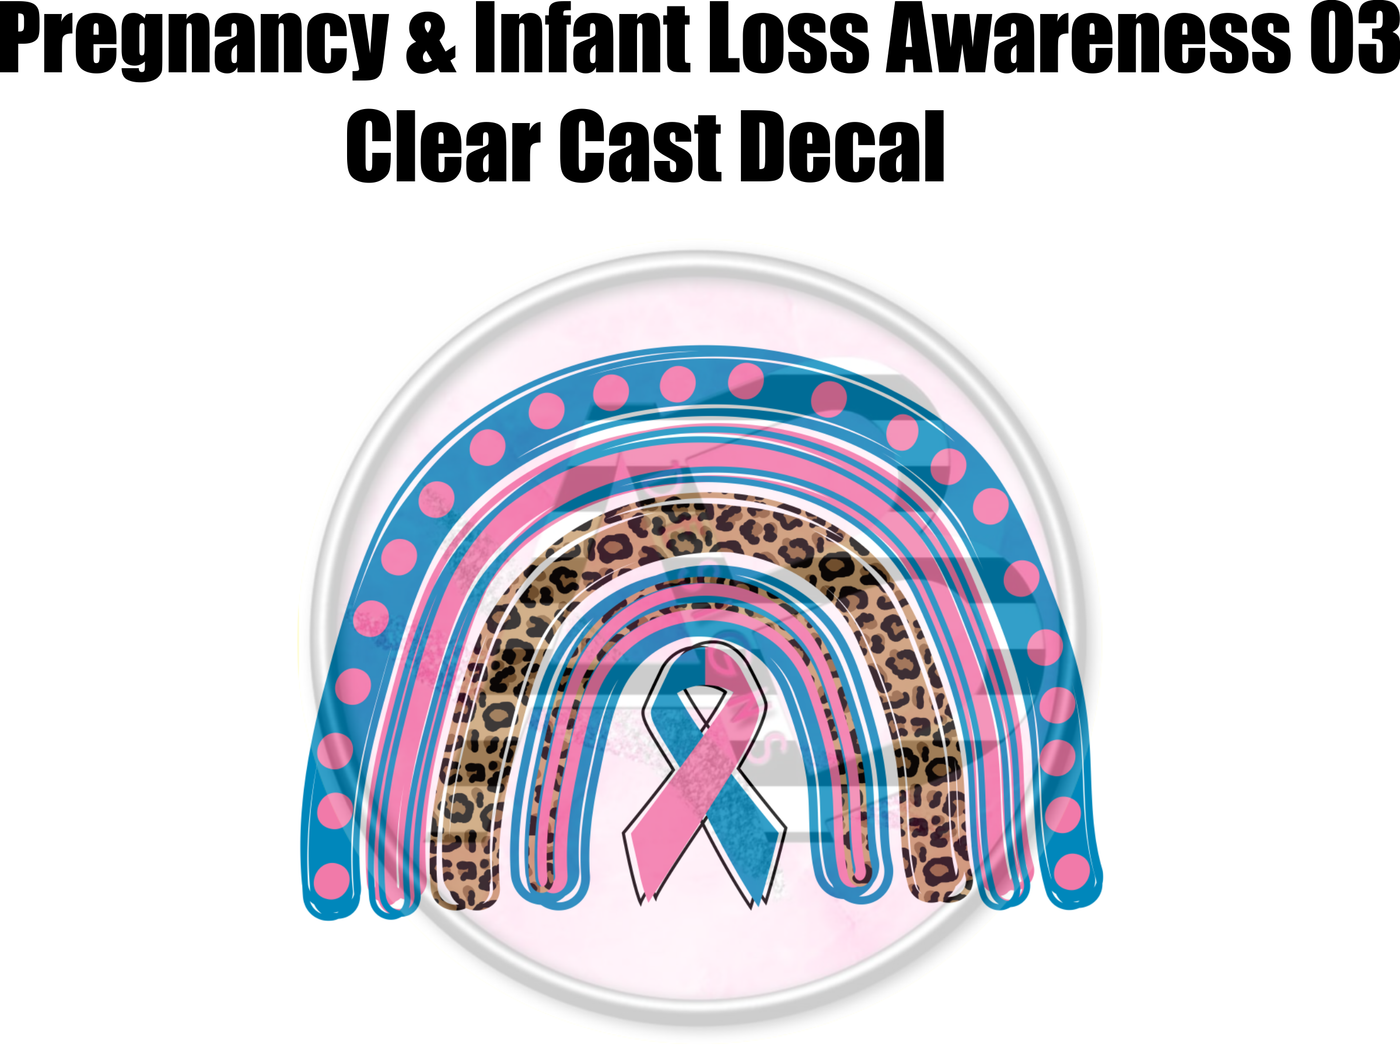 Pregnancy & Infant Loss Awareness 03 - Clear Cast Decal